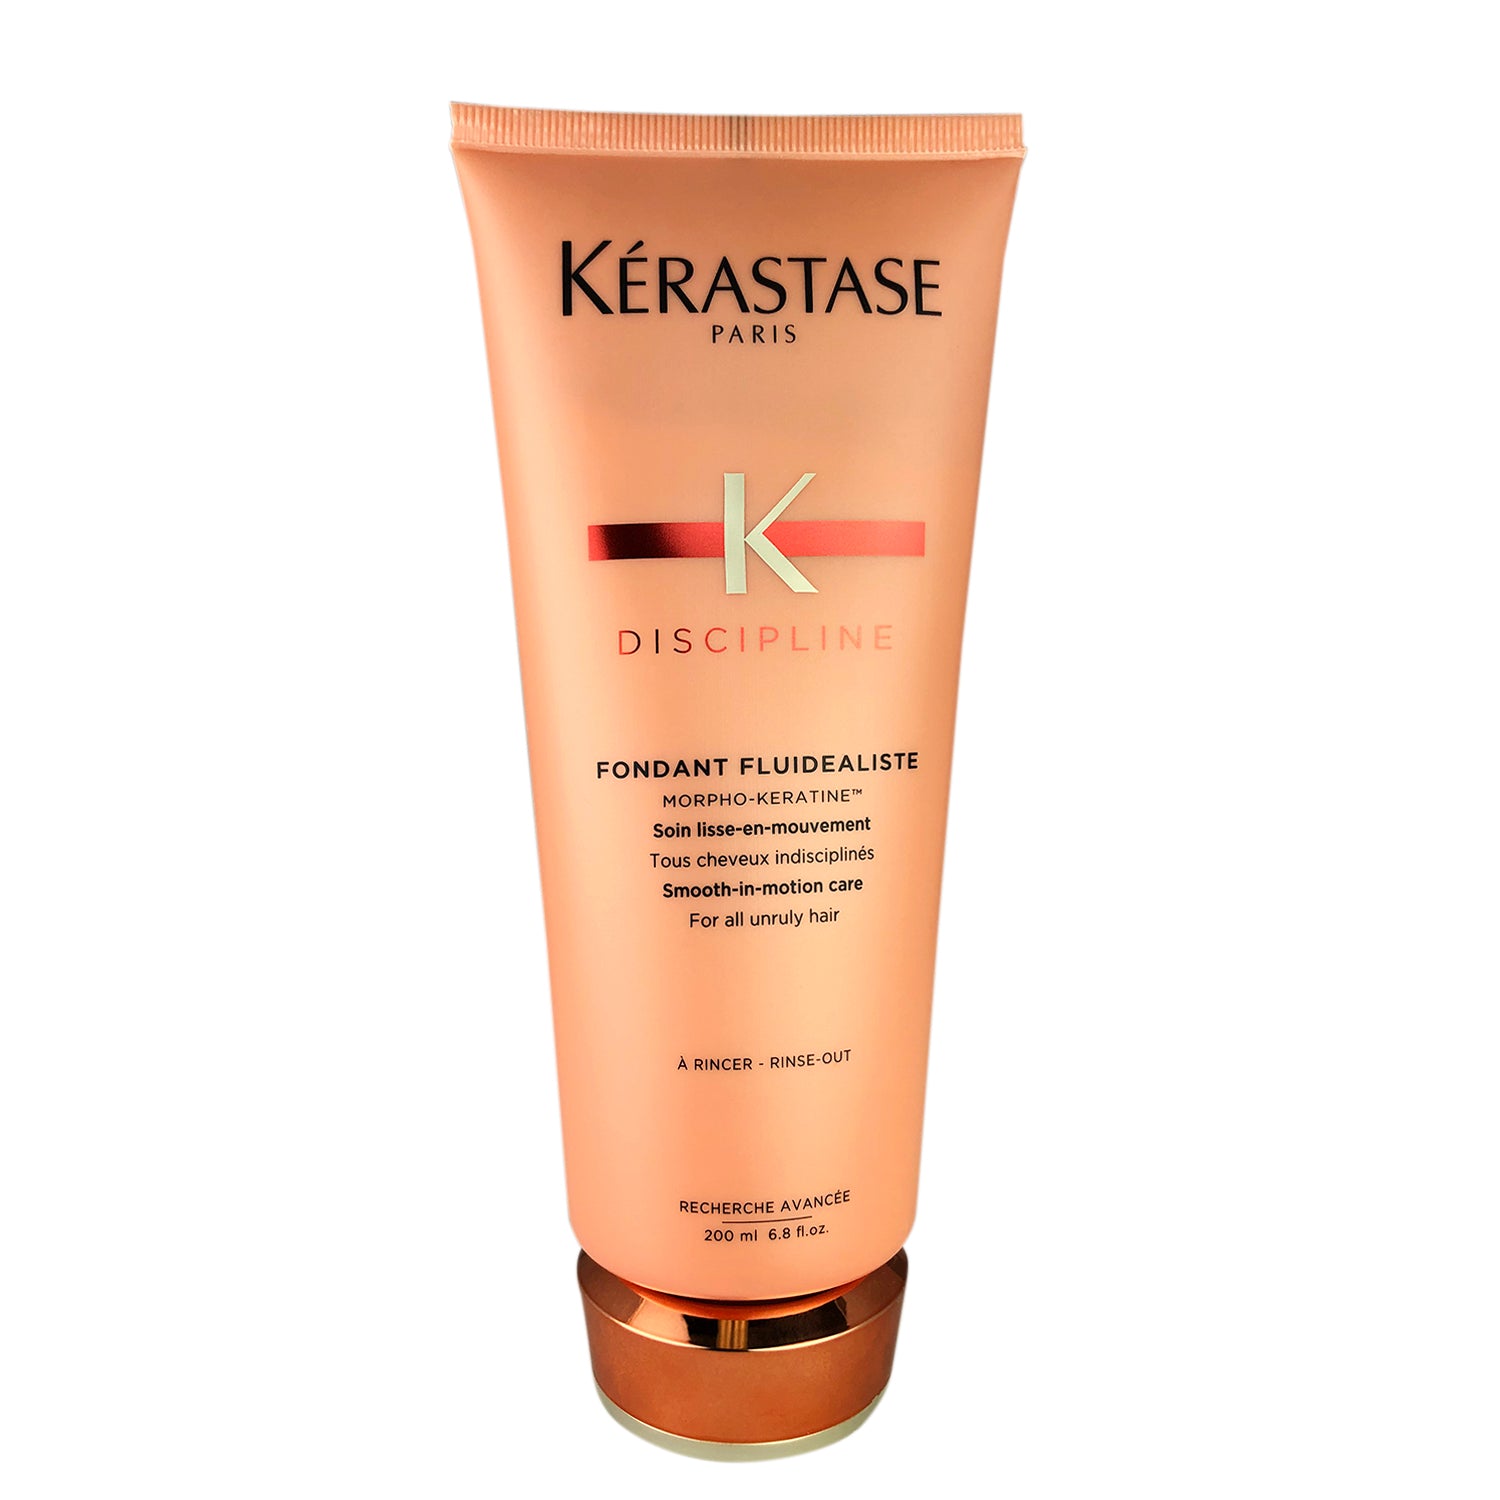 Kerastase Discipline  Smooth in Motion Hair Care Rinse Out for All Unruly Hair 6.8 oz